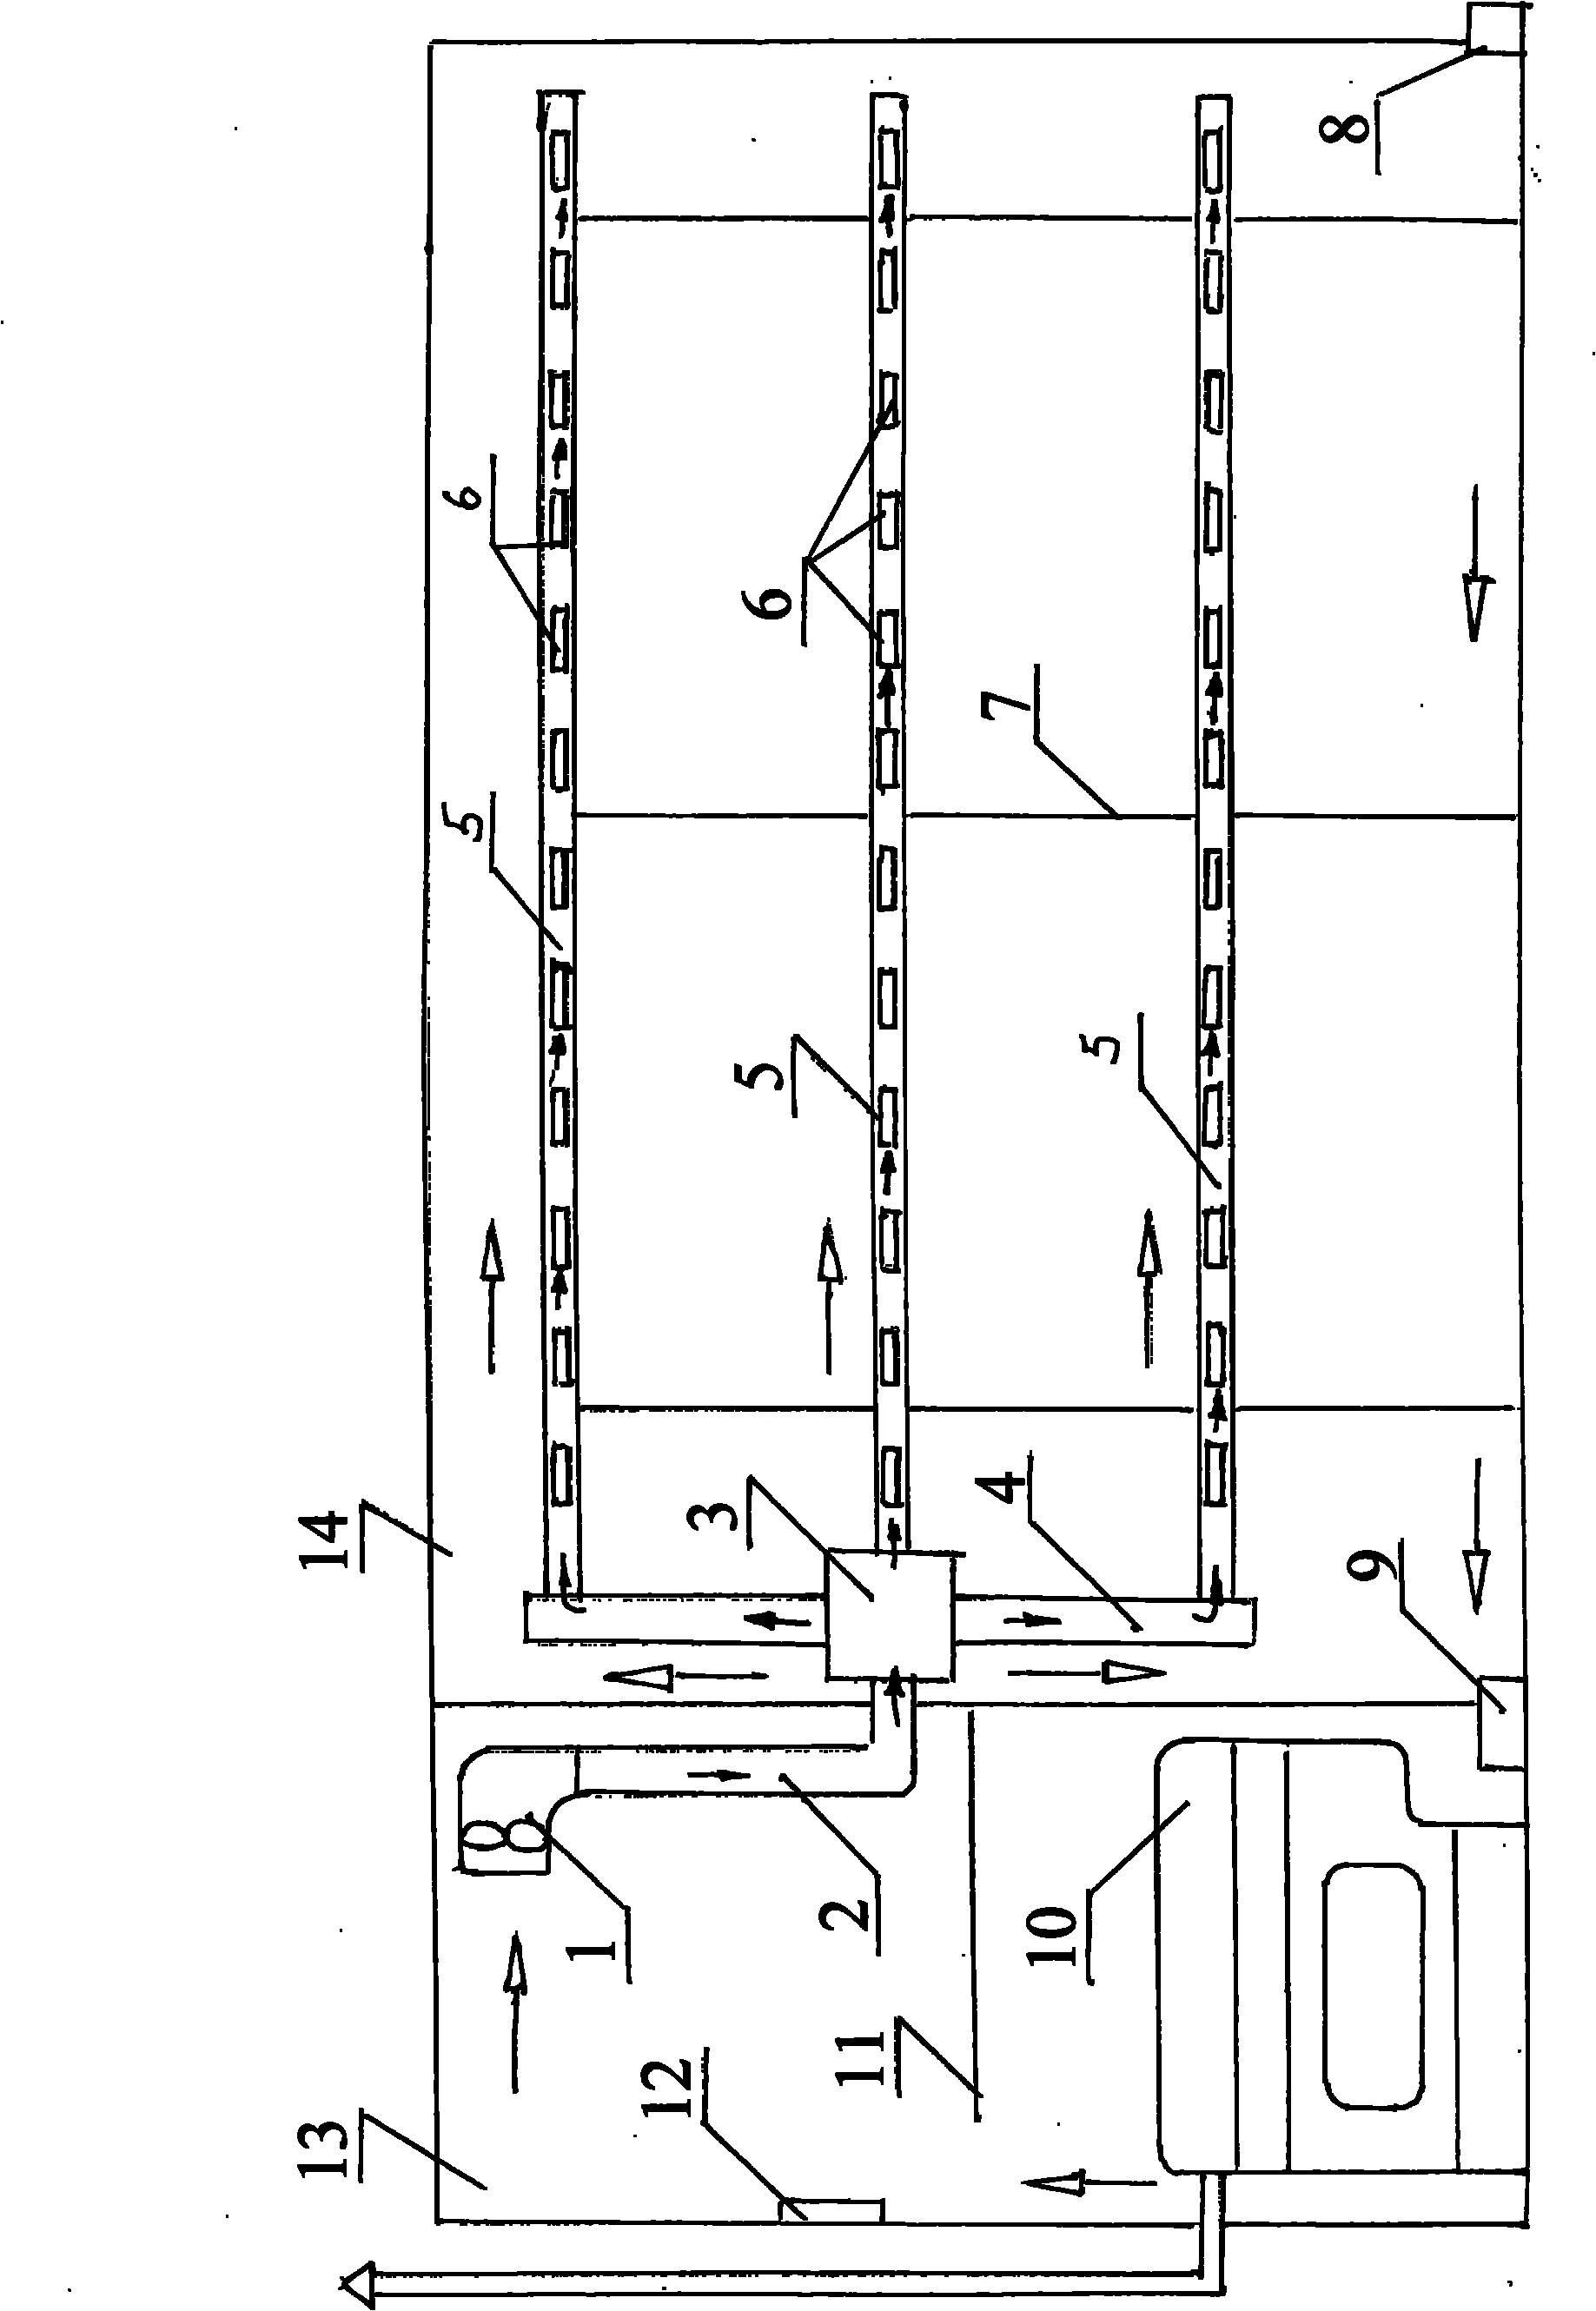 Method and device for ventilation in primary tobacco baking in bulk curing barn